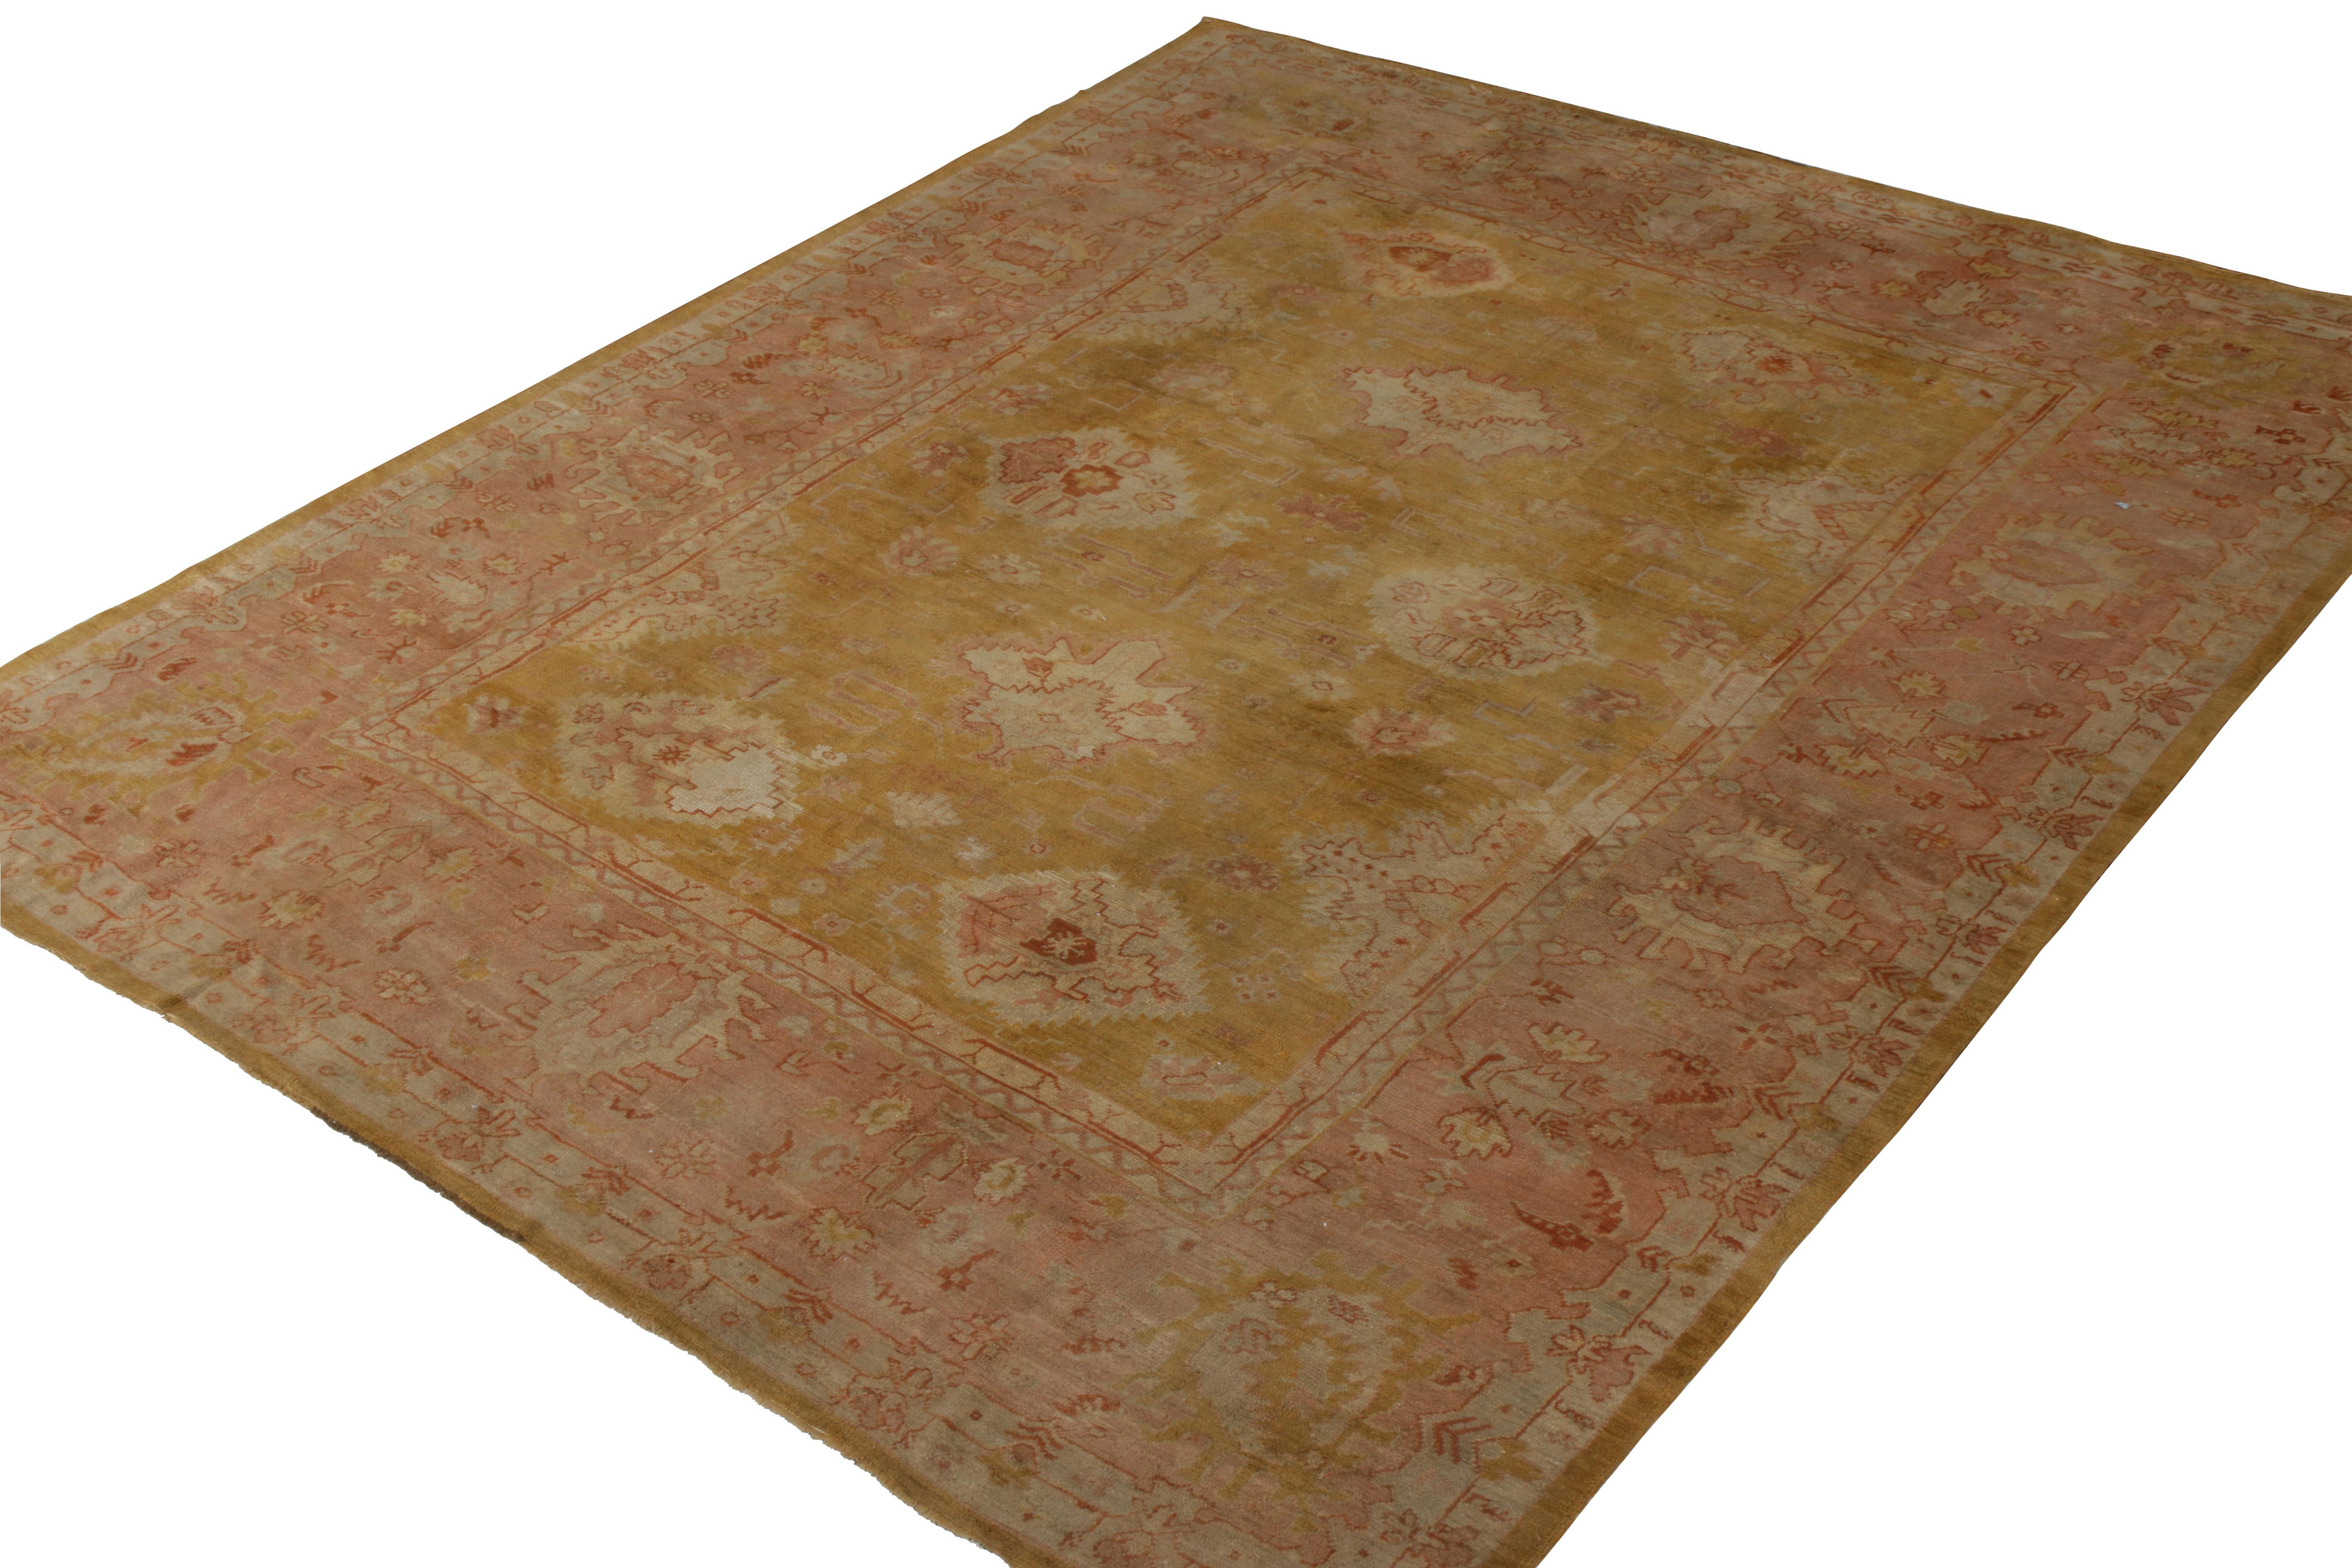 Turkish Hand-Knotted Antique Oushak Rug in Gold and Pink Floral Pattern For Sale